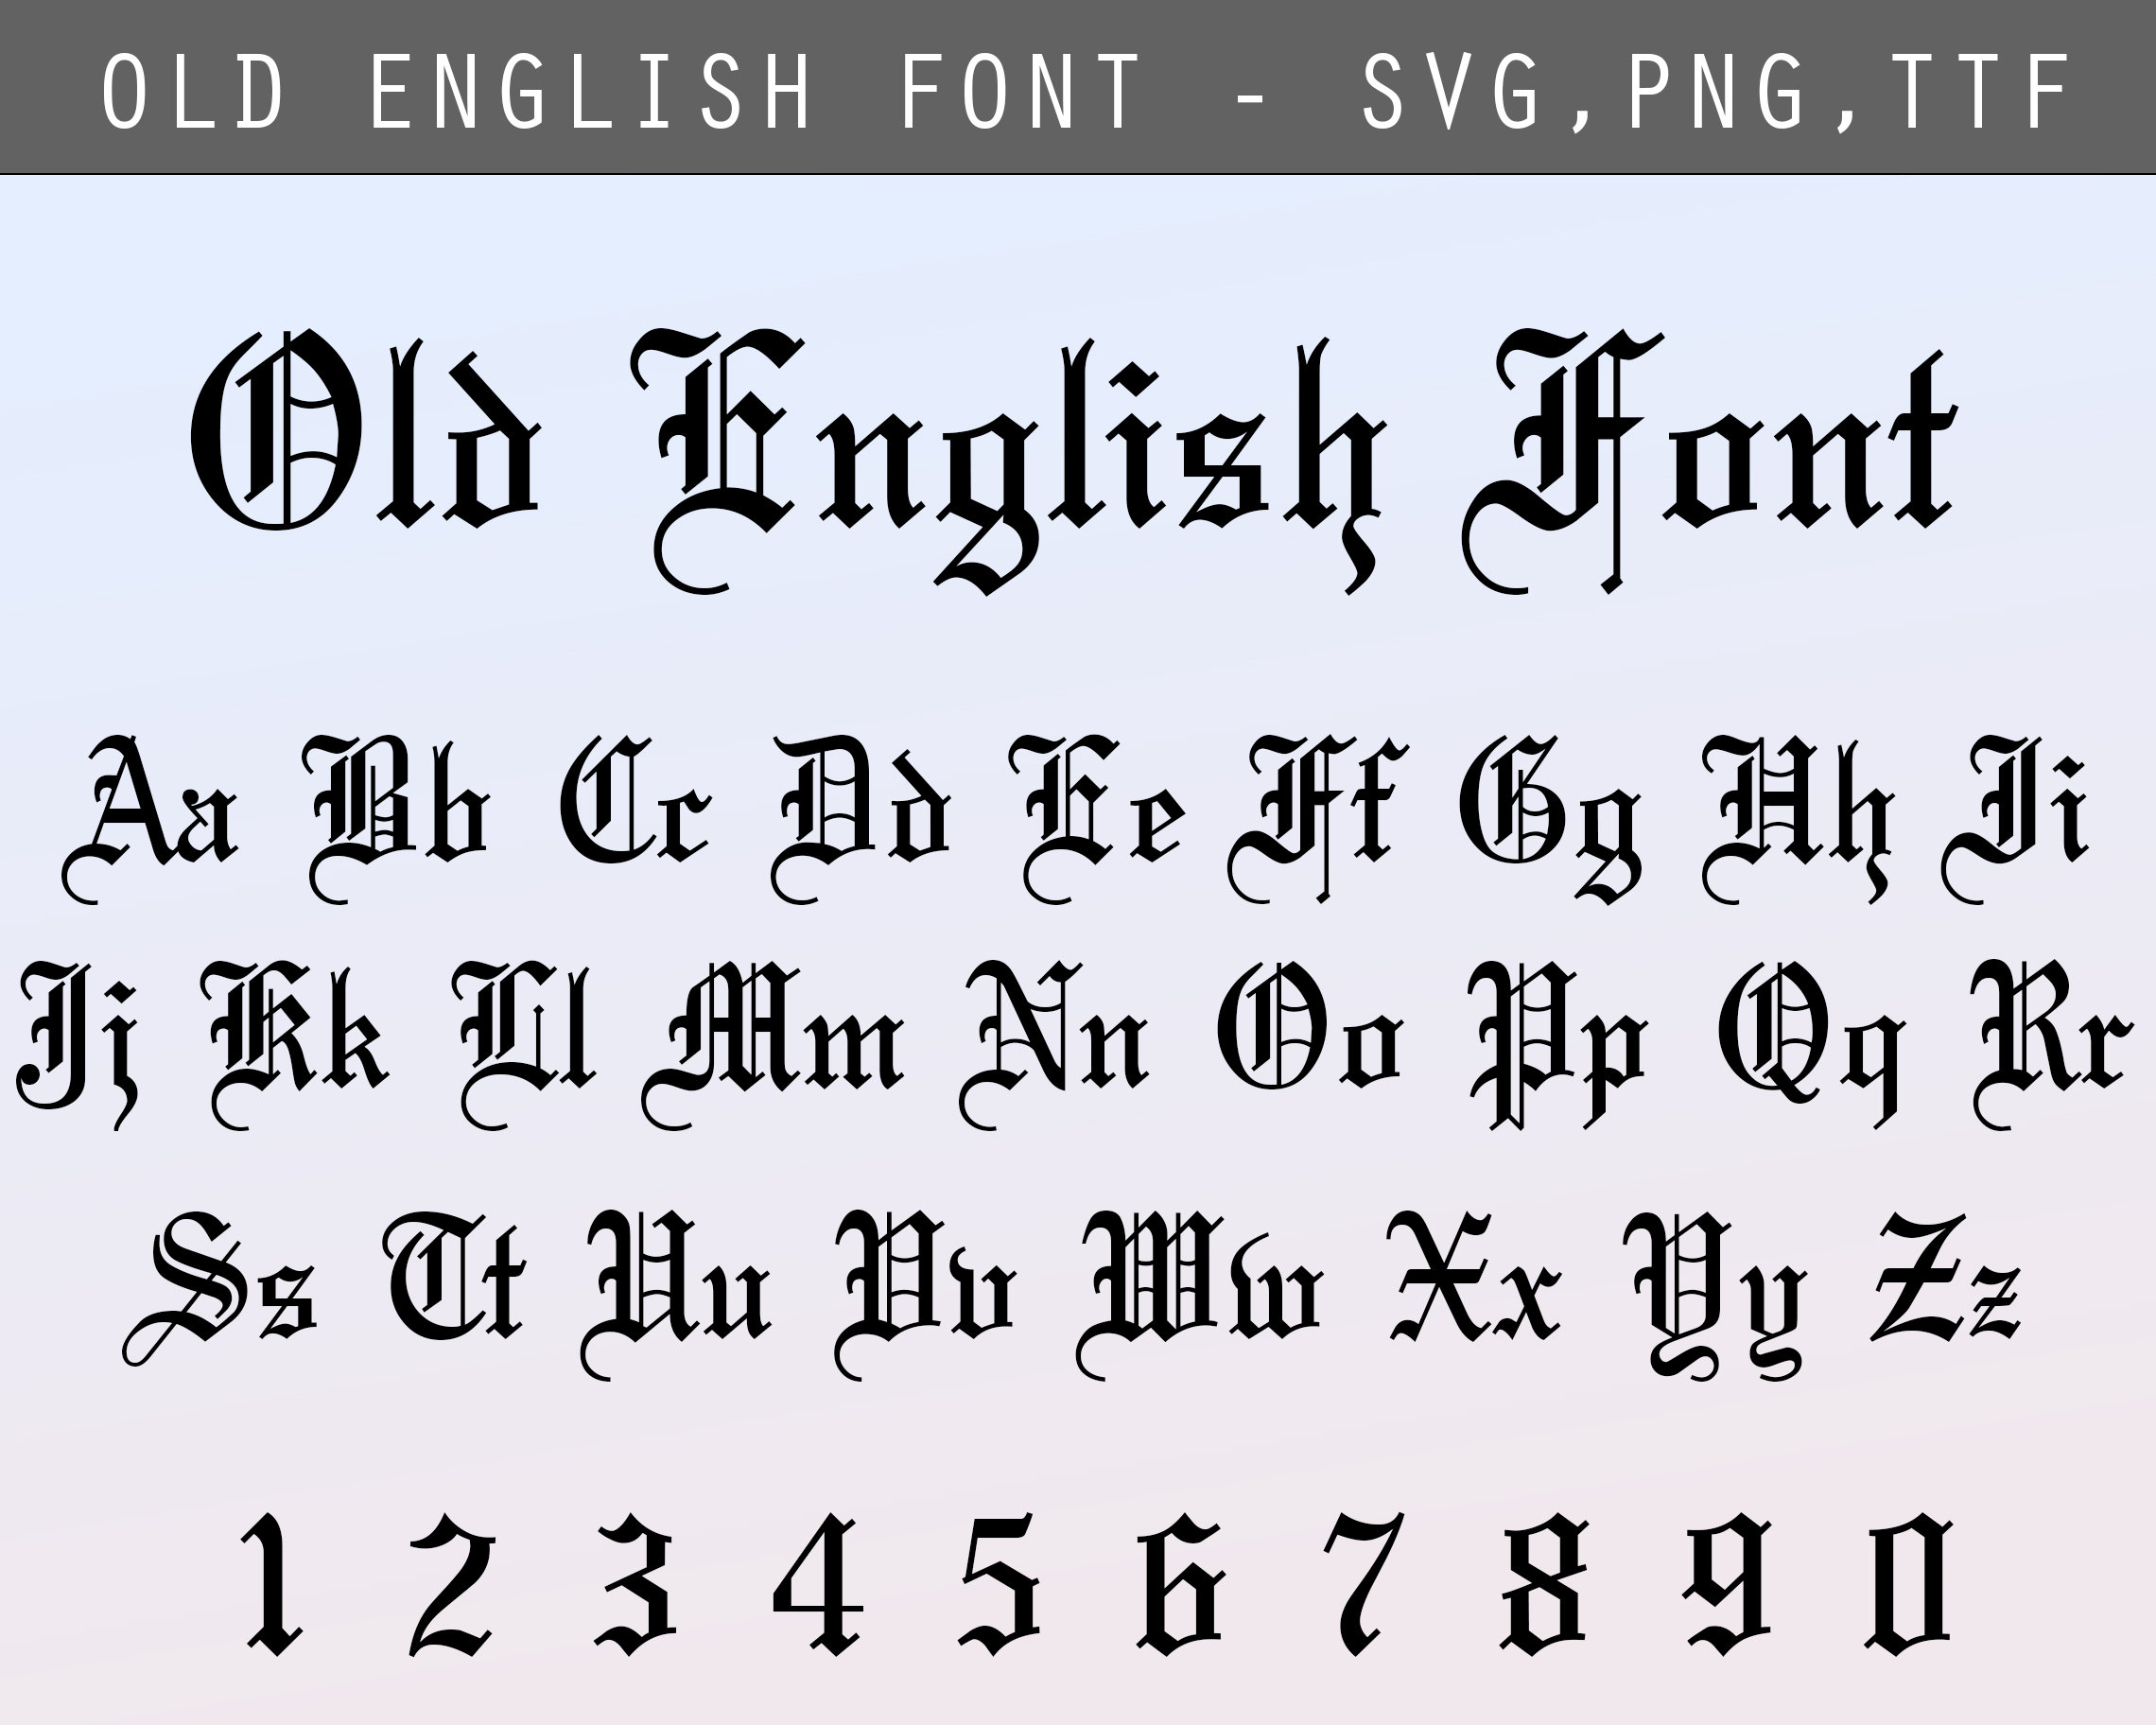 2 Old English Fonts SVG TTF Png Letters & Numbers Font for - Etsy UK